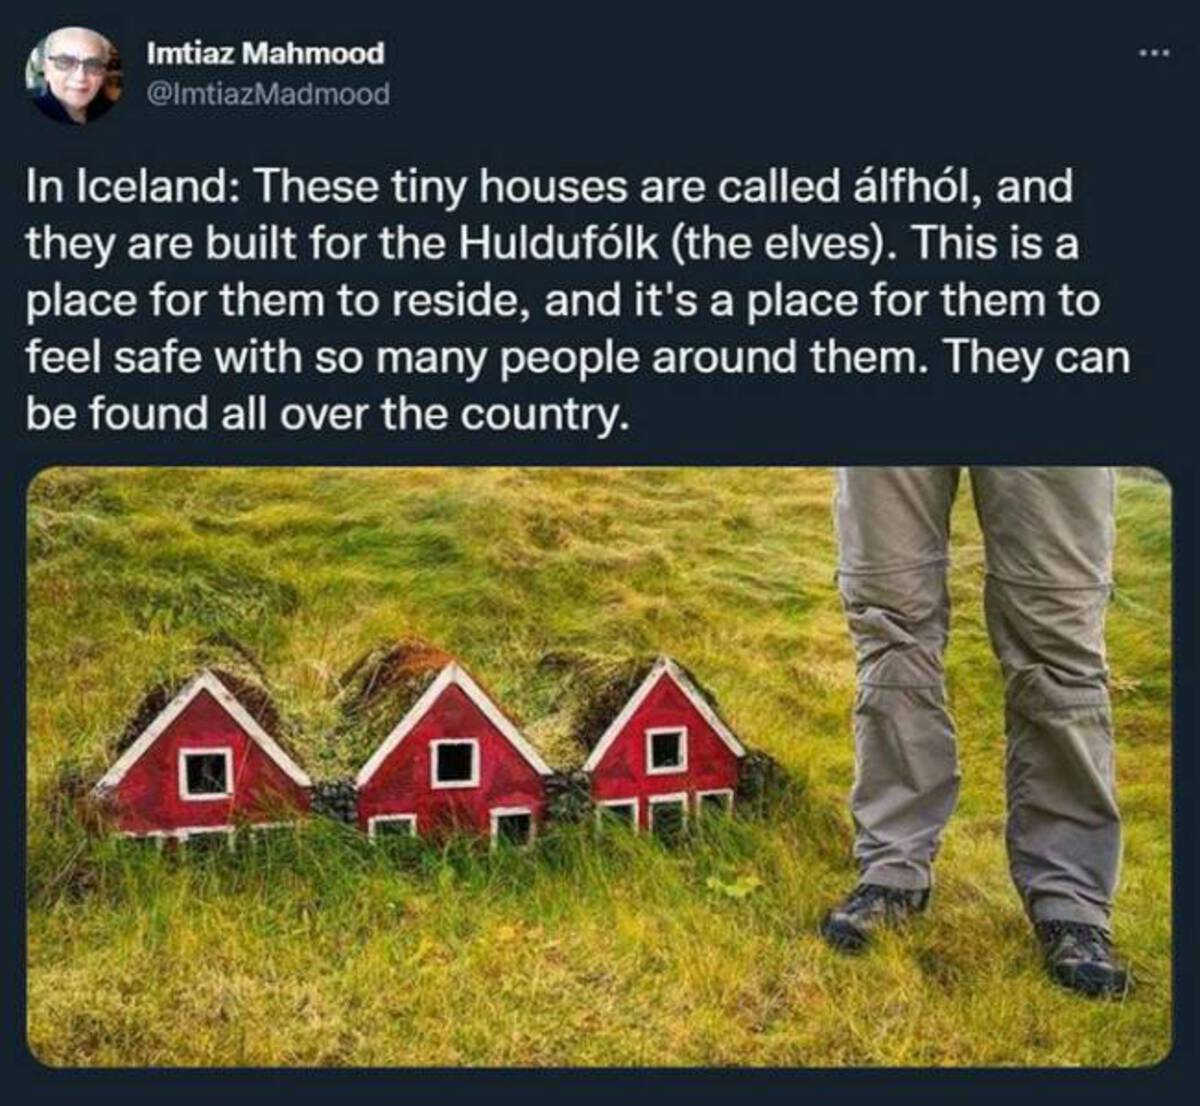 iceland elves - Imtiaz Mahmood In Iceland These tiny houses are called lfhl, and they are built for the Hulduflk the elves. This is a place for them to reside, and it's a place for them to feel safe with so many people around them. They can be found all o